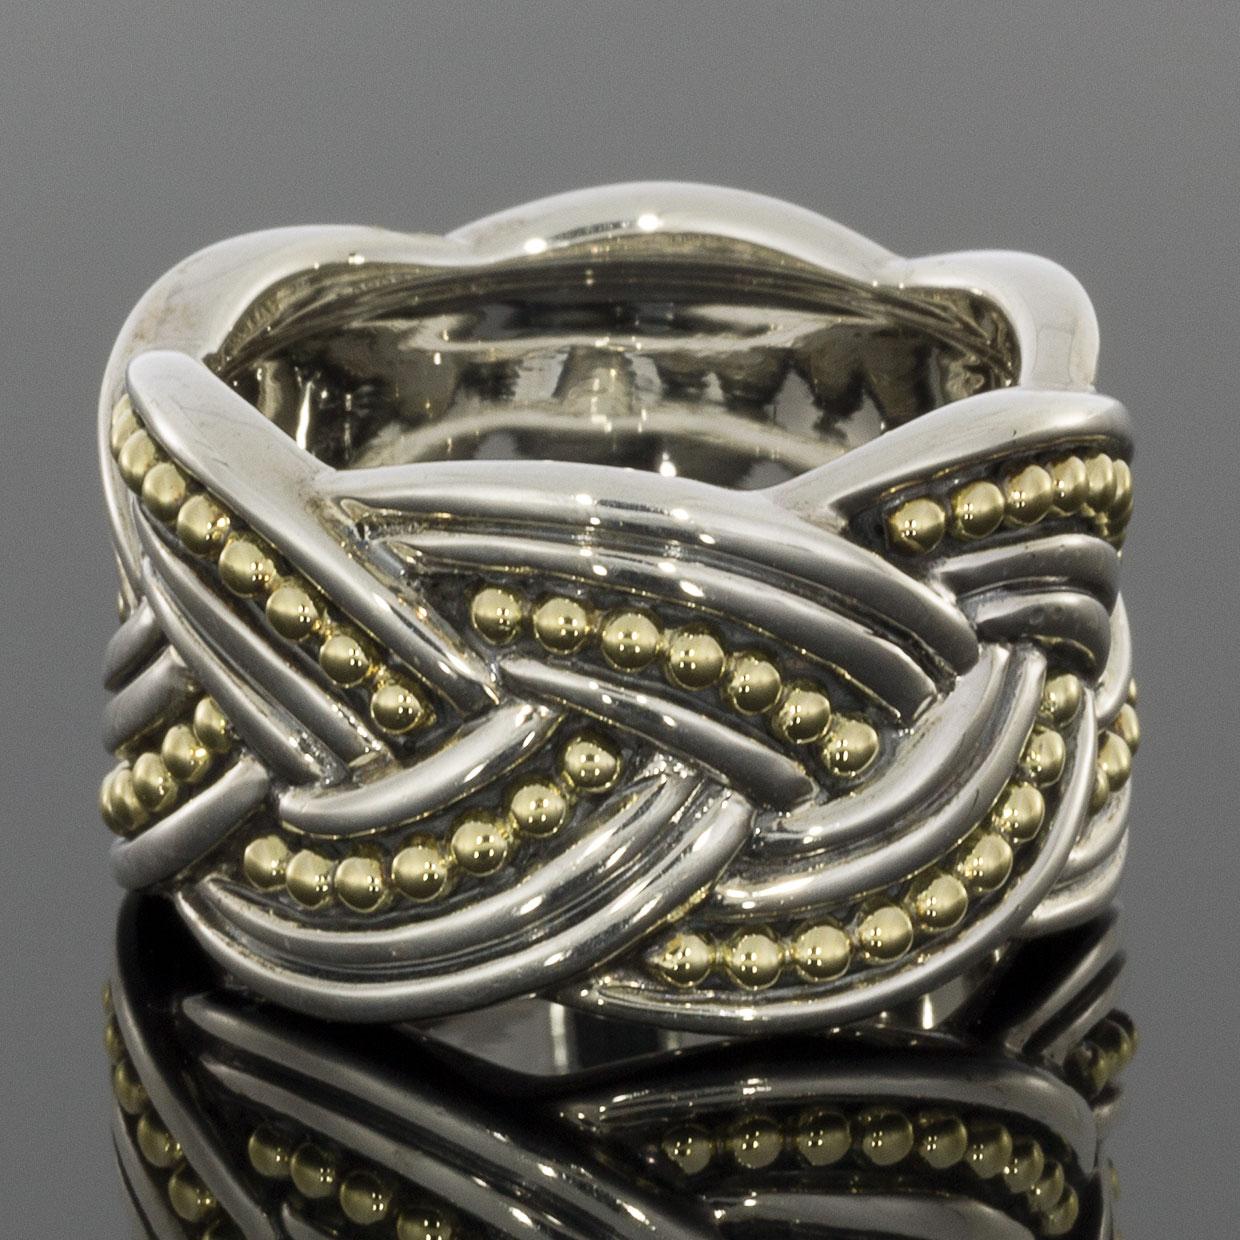 Item Details
Estimated Retail $850.00
Brand Lagos
Collection Torsade
Metal Mixed Metals
Ring Size 7.00
Sizable No
Width 13.25mm
Metal Purity 18k
Finish Polished
Style Eternity

In 1977, LAGOS was founded by artist & master jeweler Stephen Lagos.